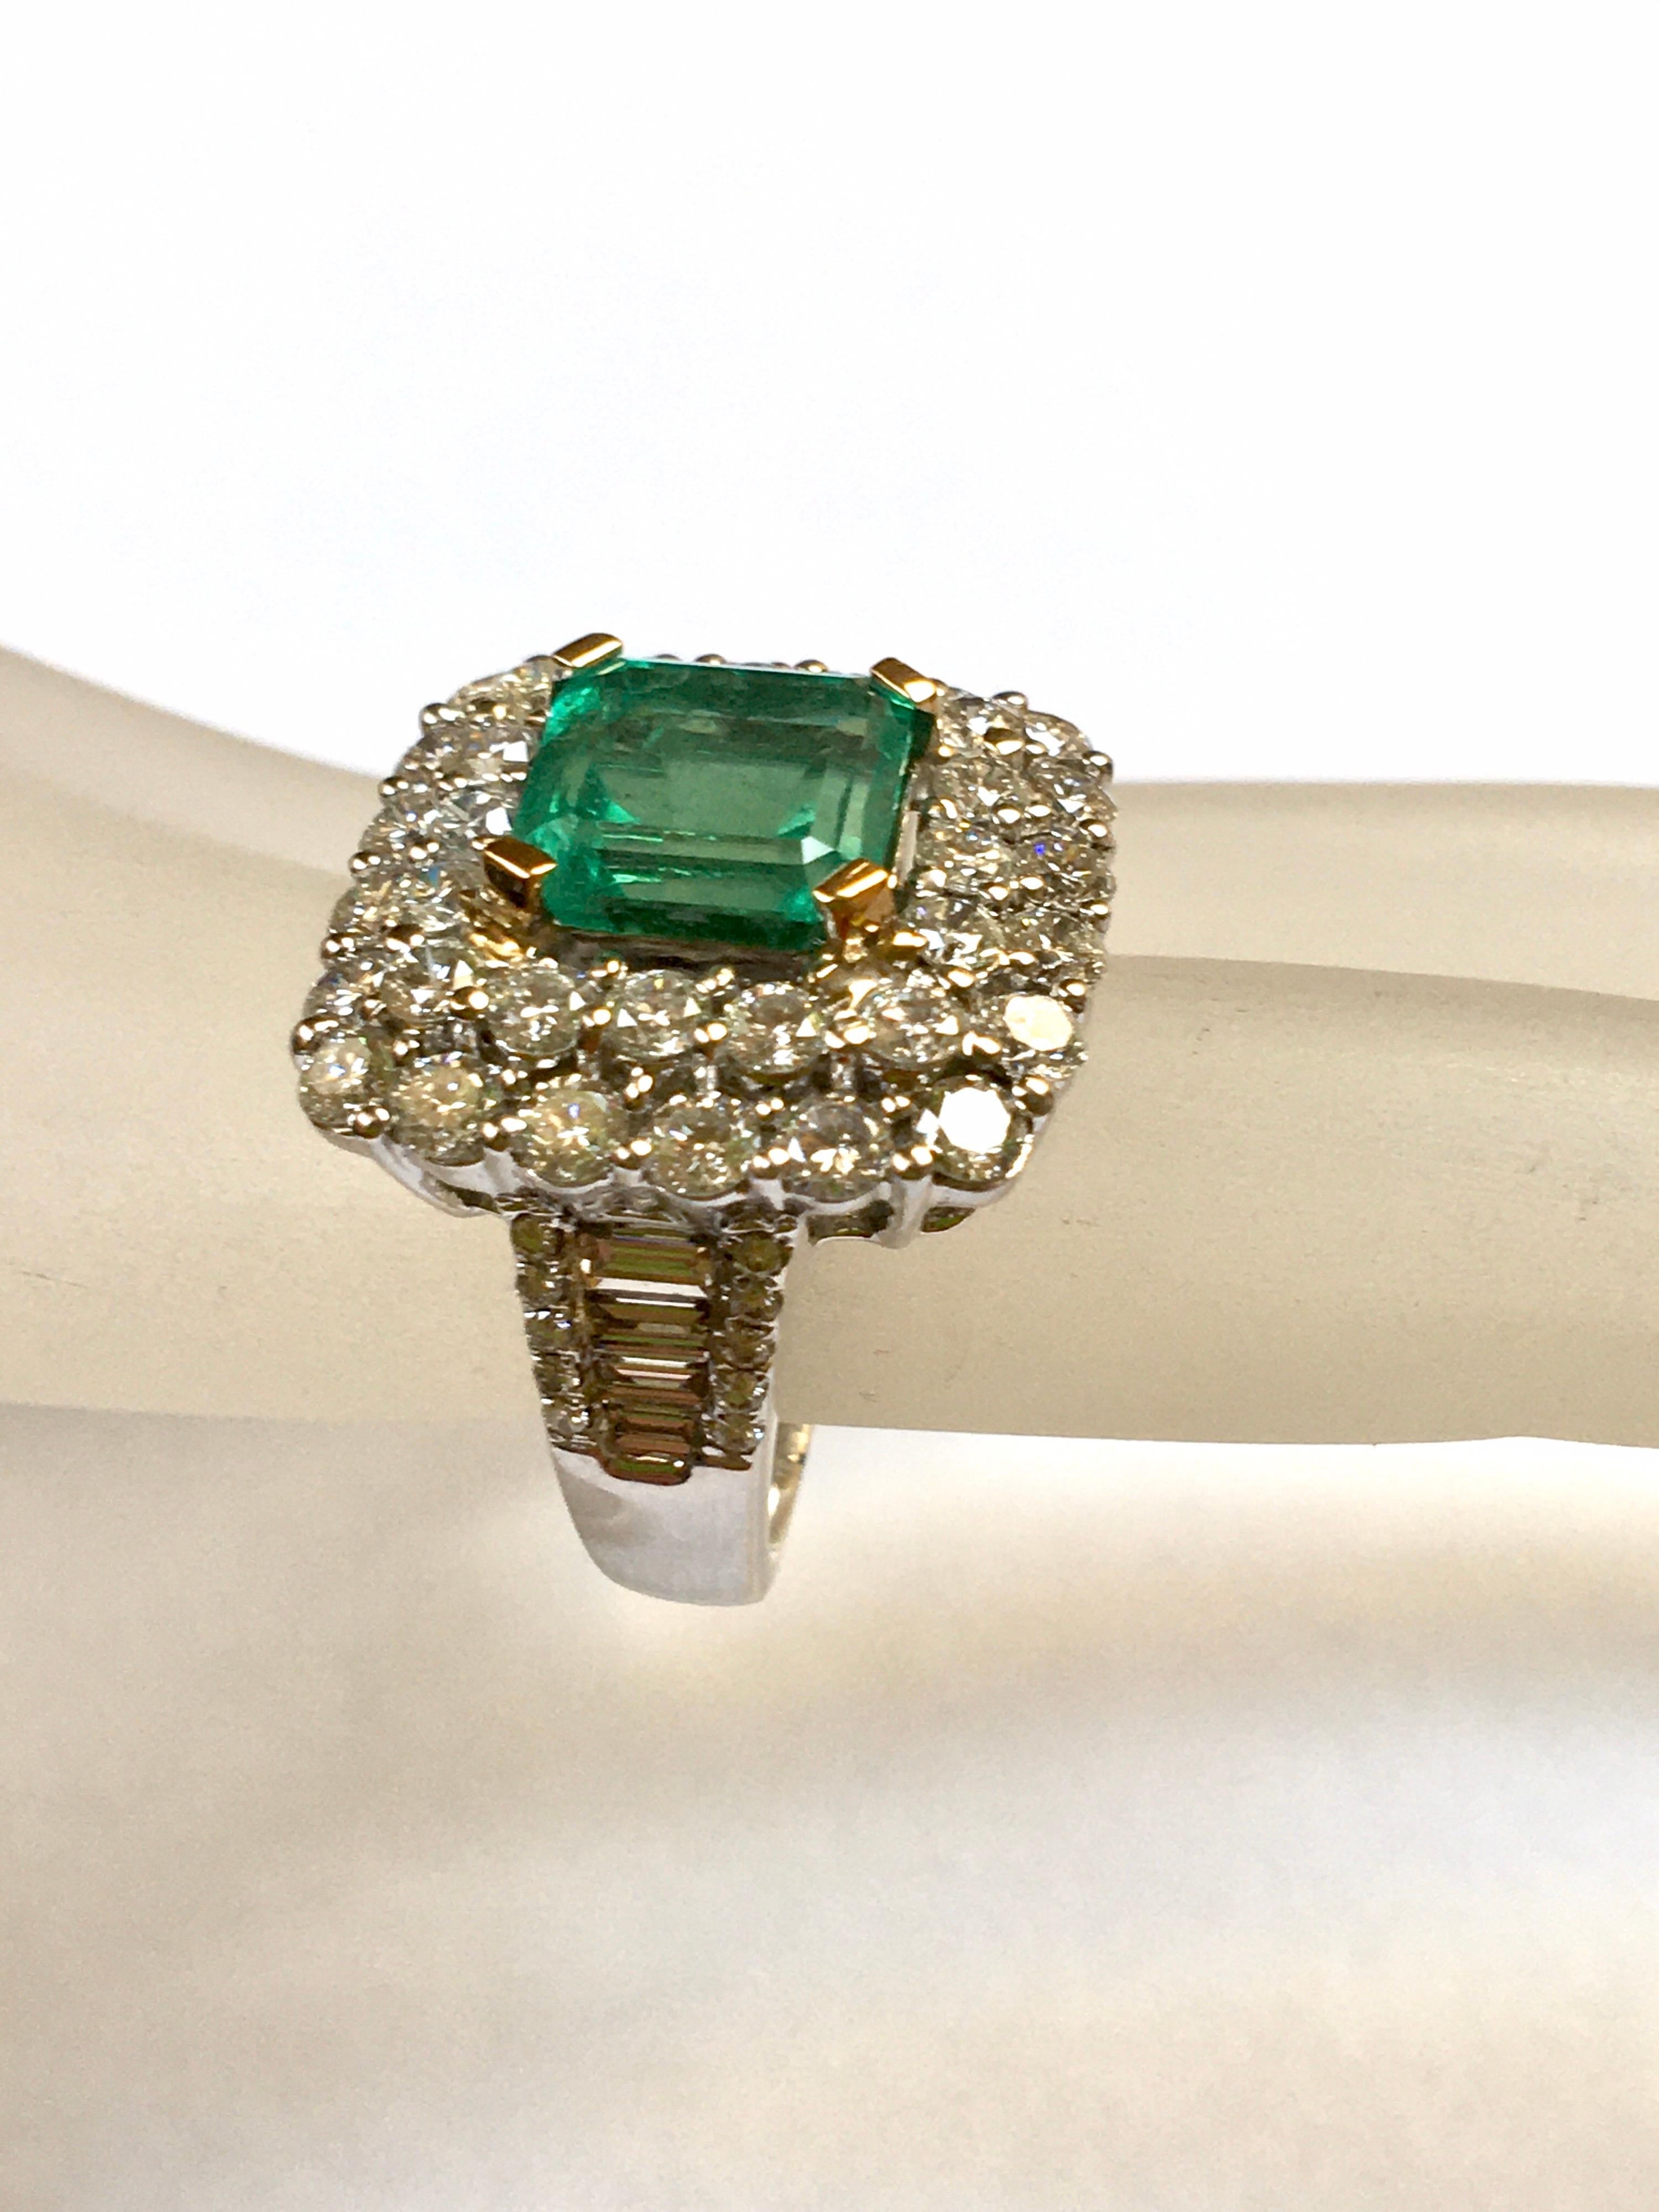 Emerald Cut 4.88 Ct Colombian Emerald 5.03 Ct Diamond Dress Ring Set in 18 Karat White Gold For Sale